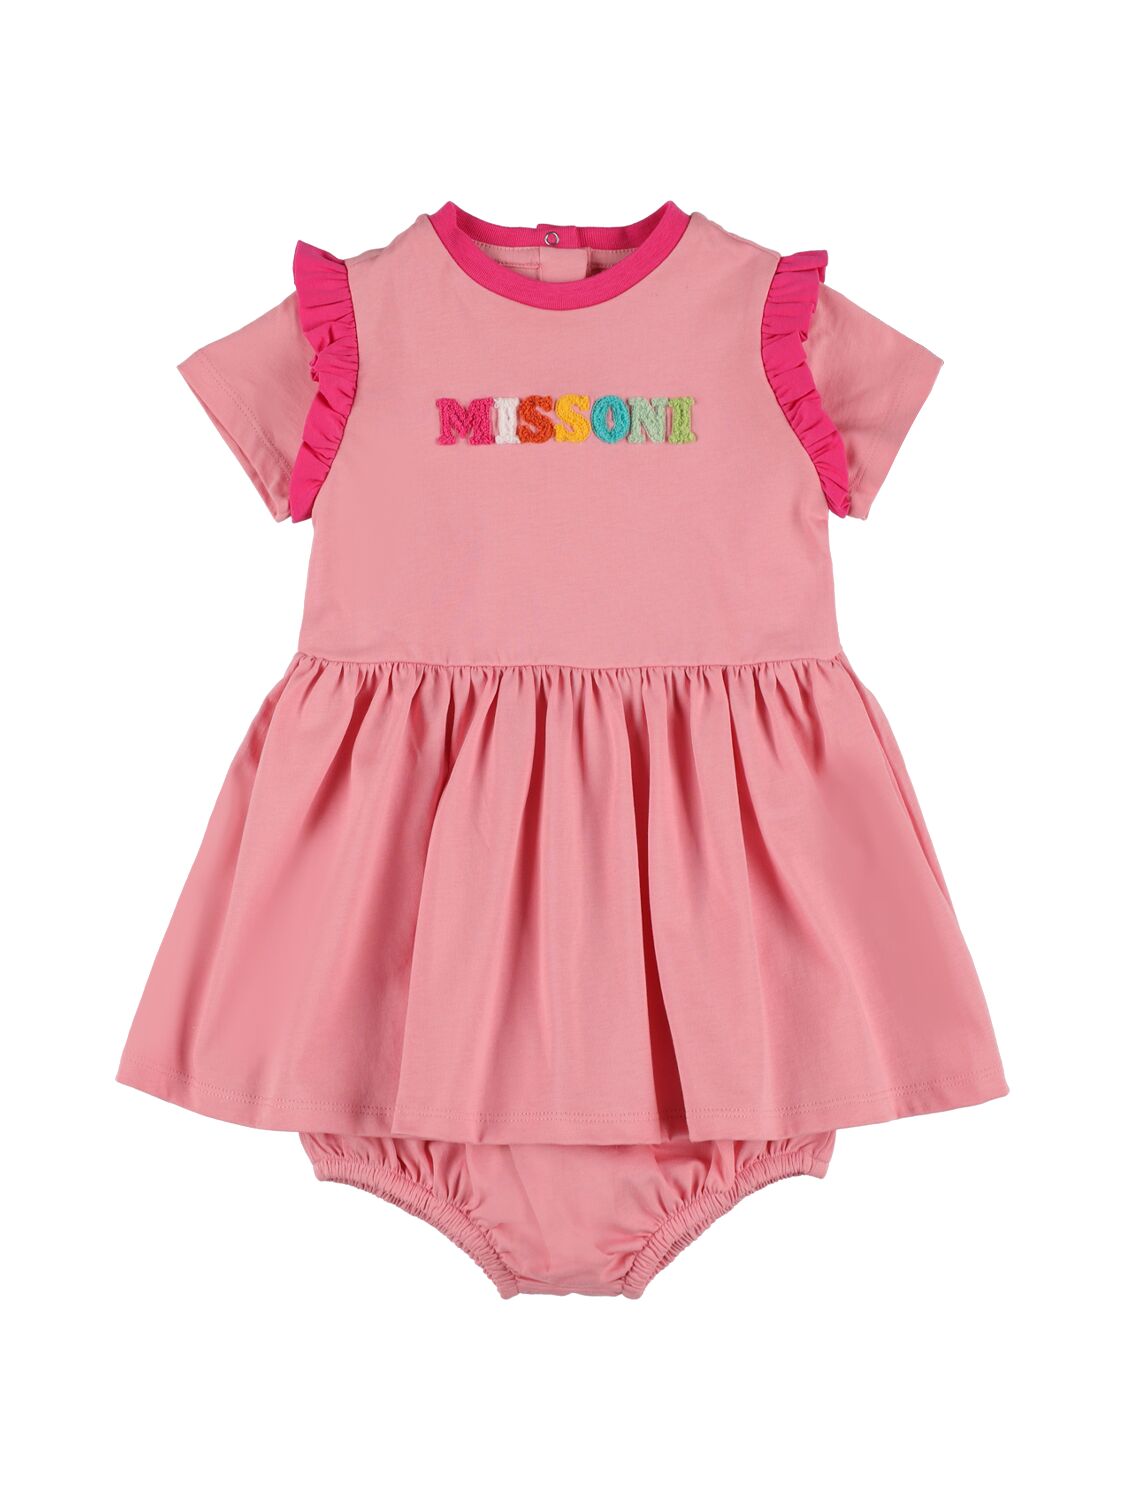 Missoni Kids' Cotton Jersey Dress & Diaper Cover In Pink